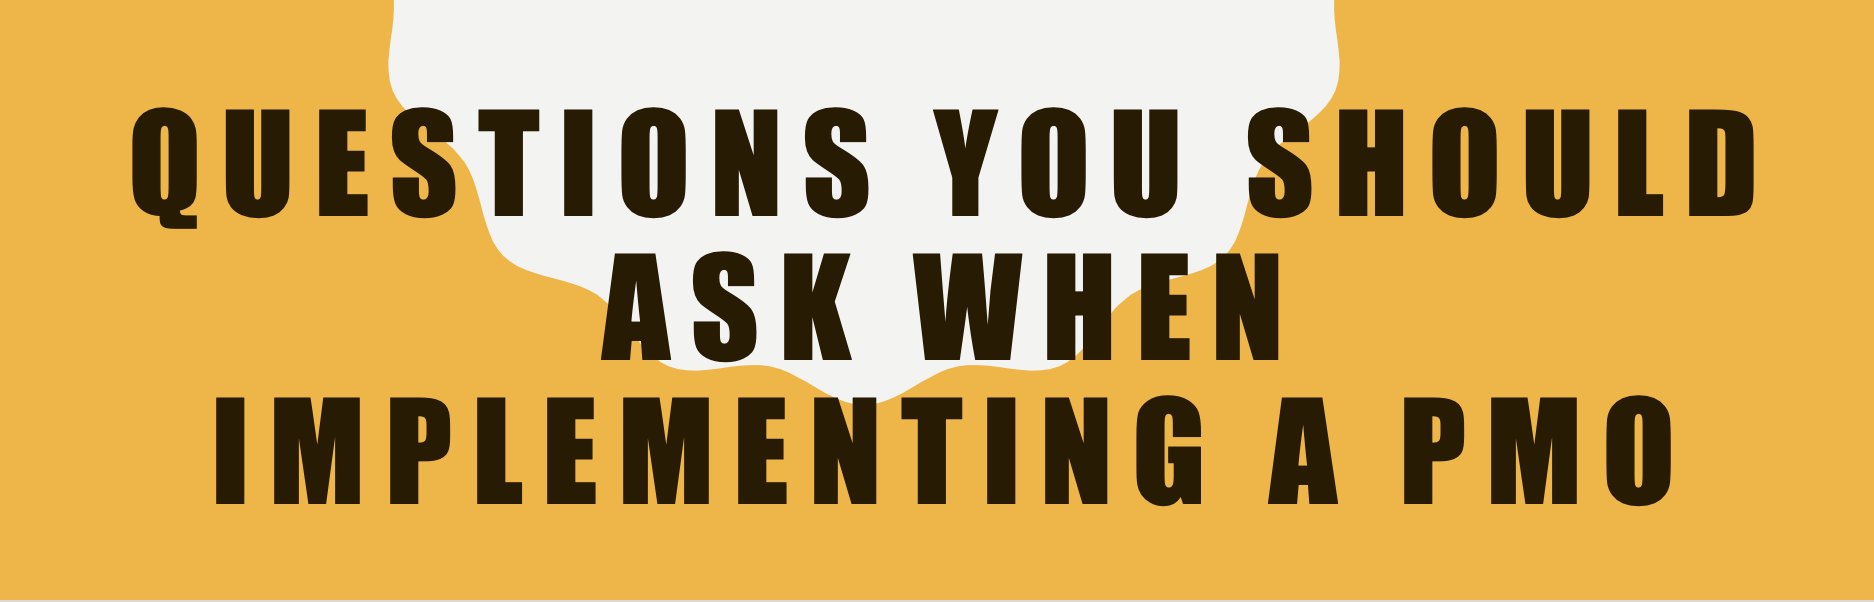 Questions You Should Ask When Implementing A PMO